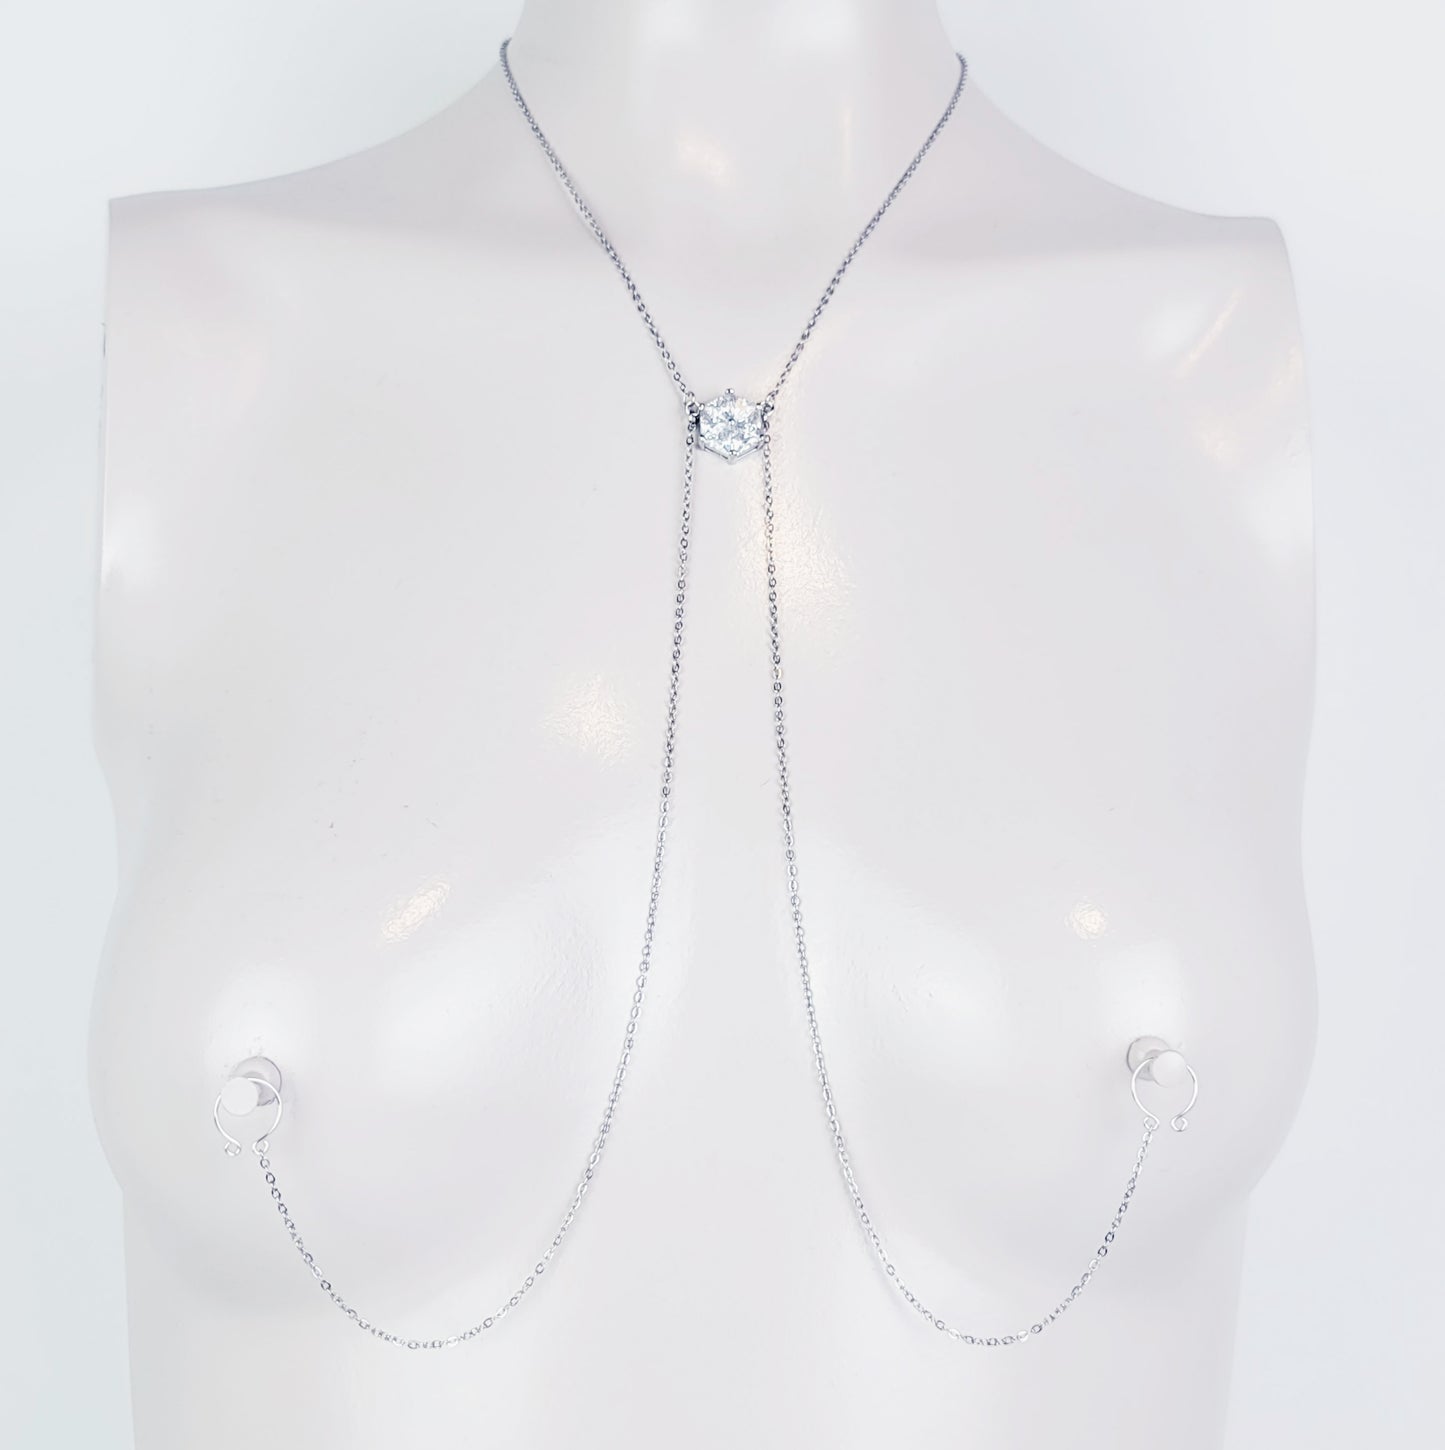 Stainless Steel Necklace to Nipple with Cubic Zirconia Pendant. Non-Piercing or with Pierced Nipples. BDSM Nipple Clamp Option.